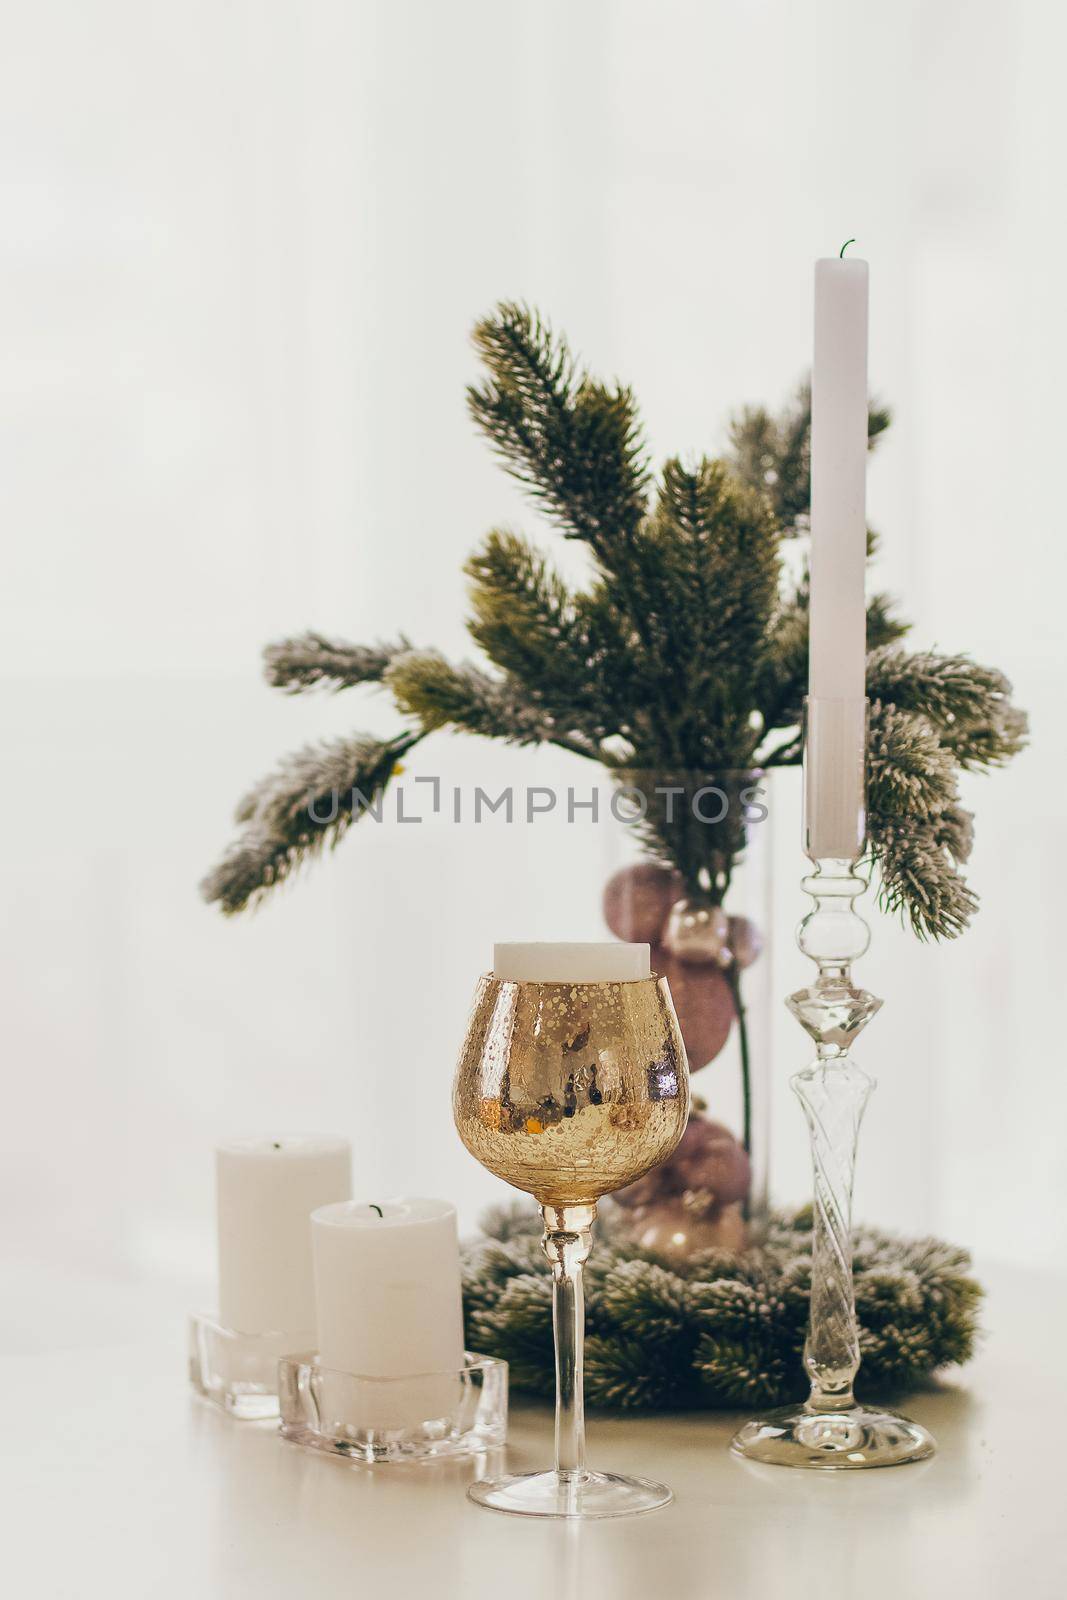 New Year's decorated house and the Christmas Tree in Scandinavian style. The kitchen table with candles atmosphere. by mmp1206